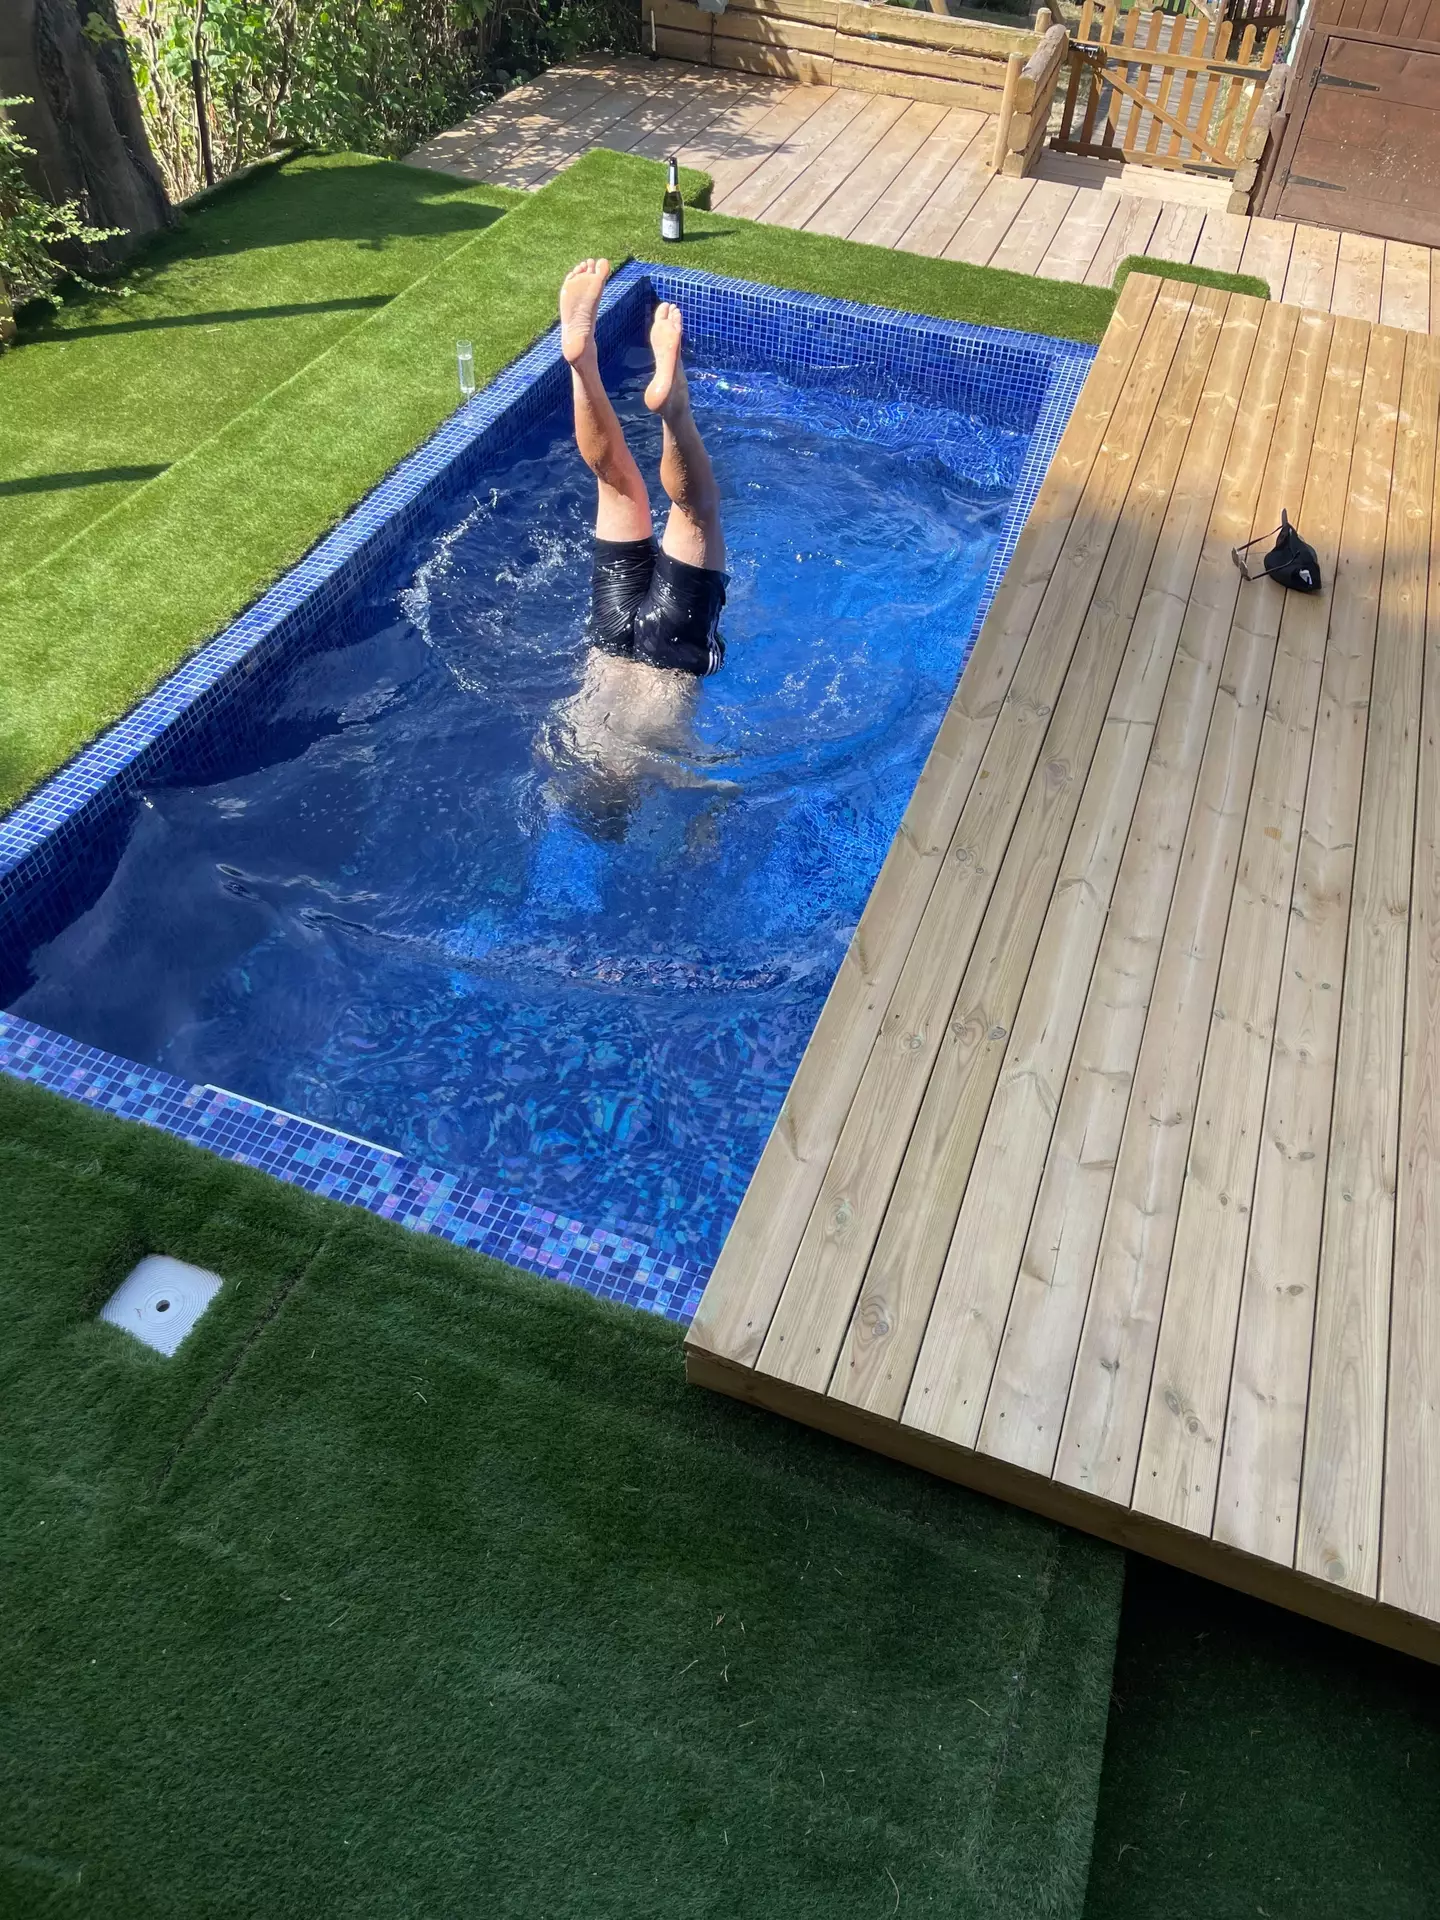 Alex finished the pool in time for the heatwave.